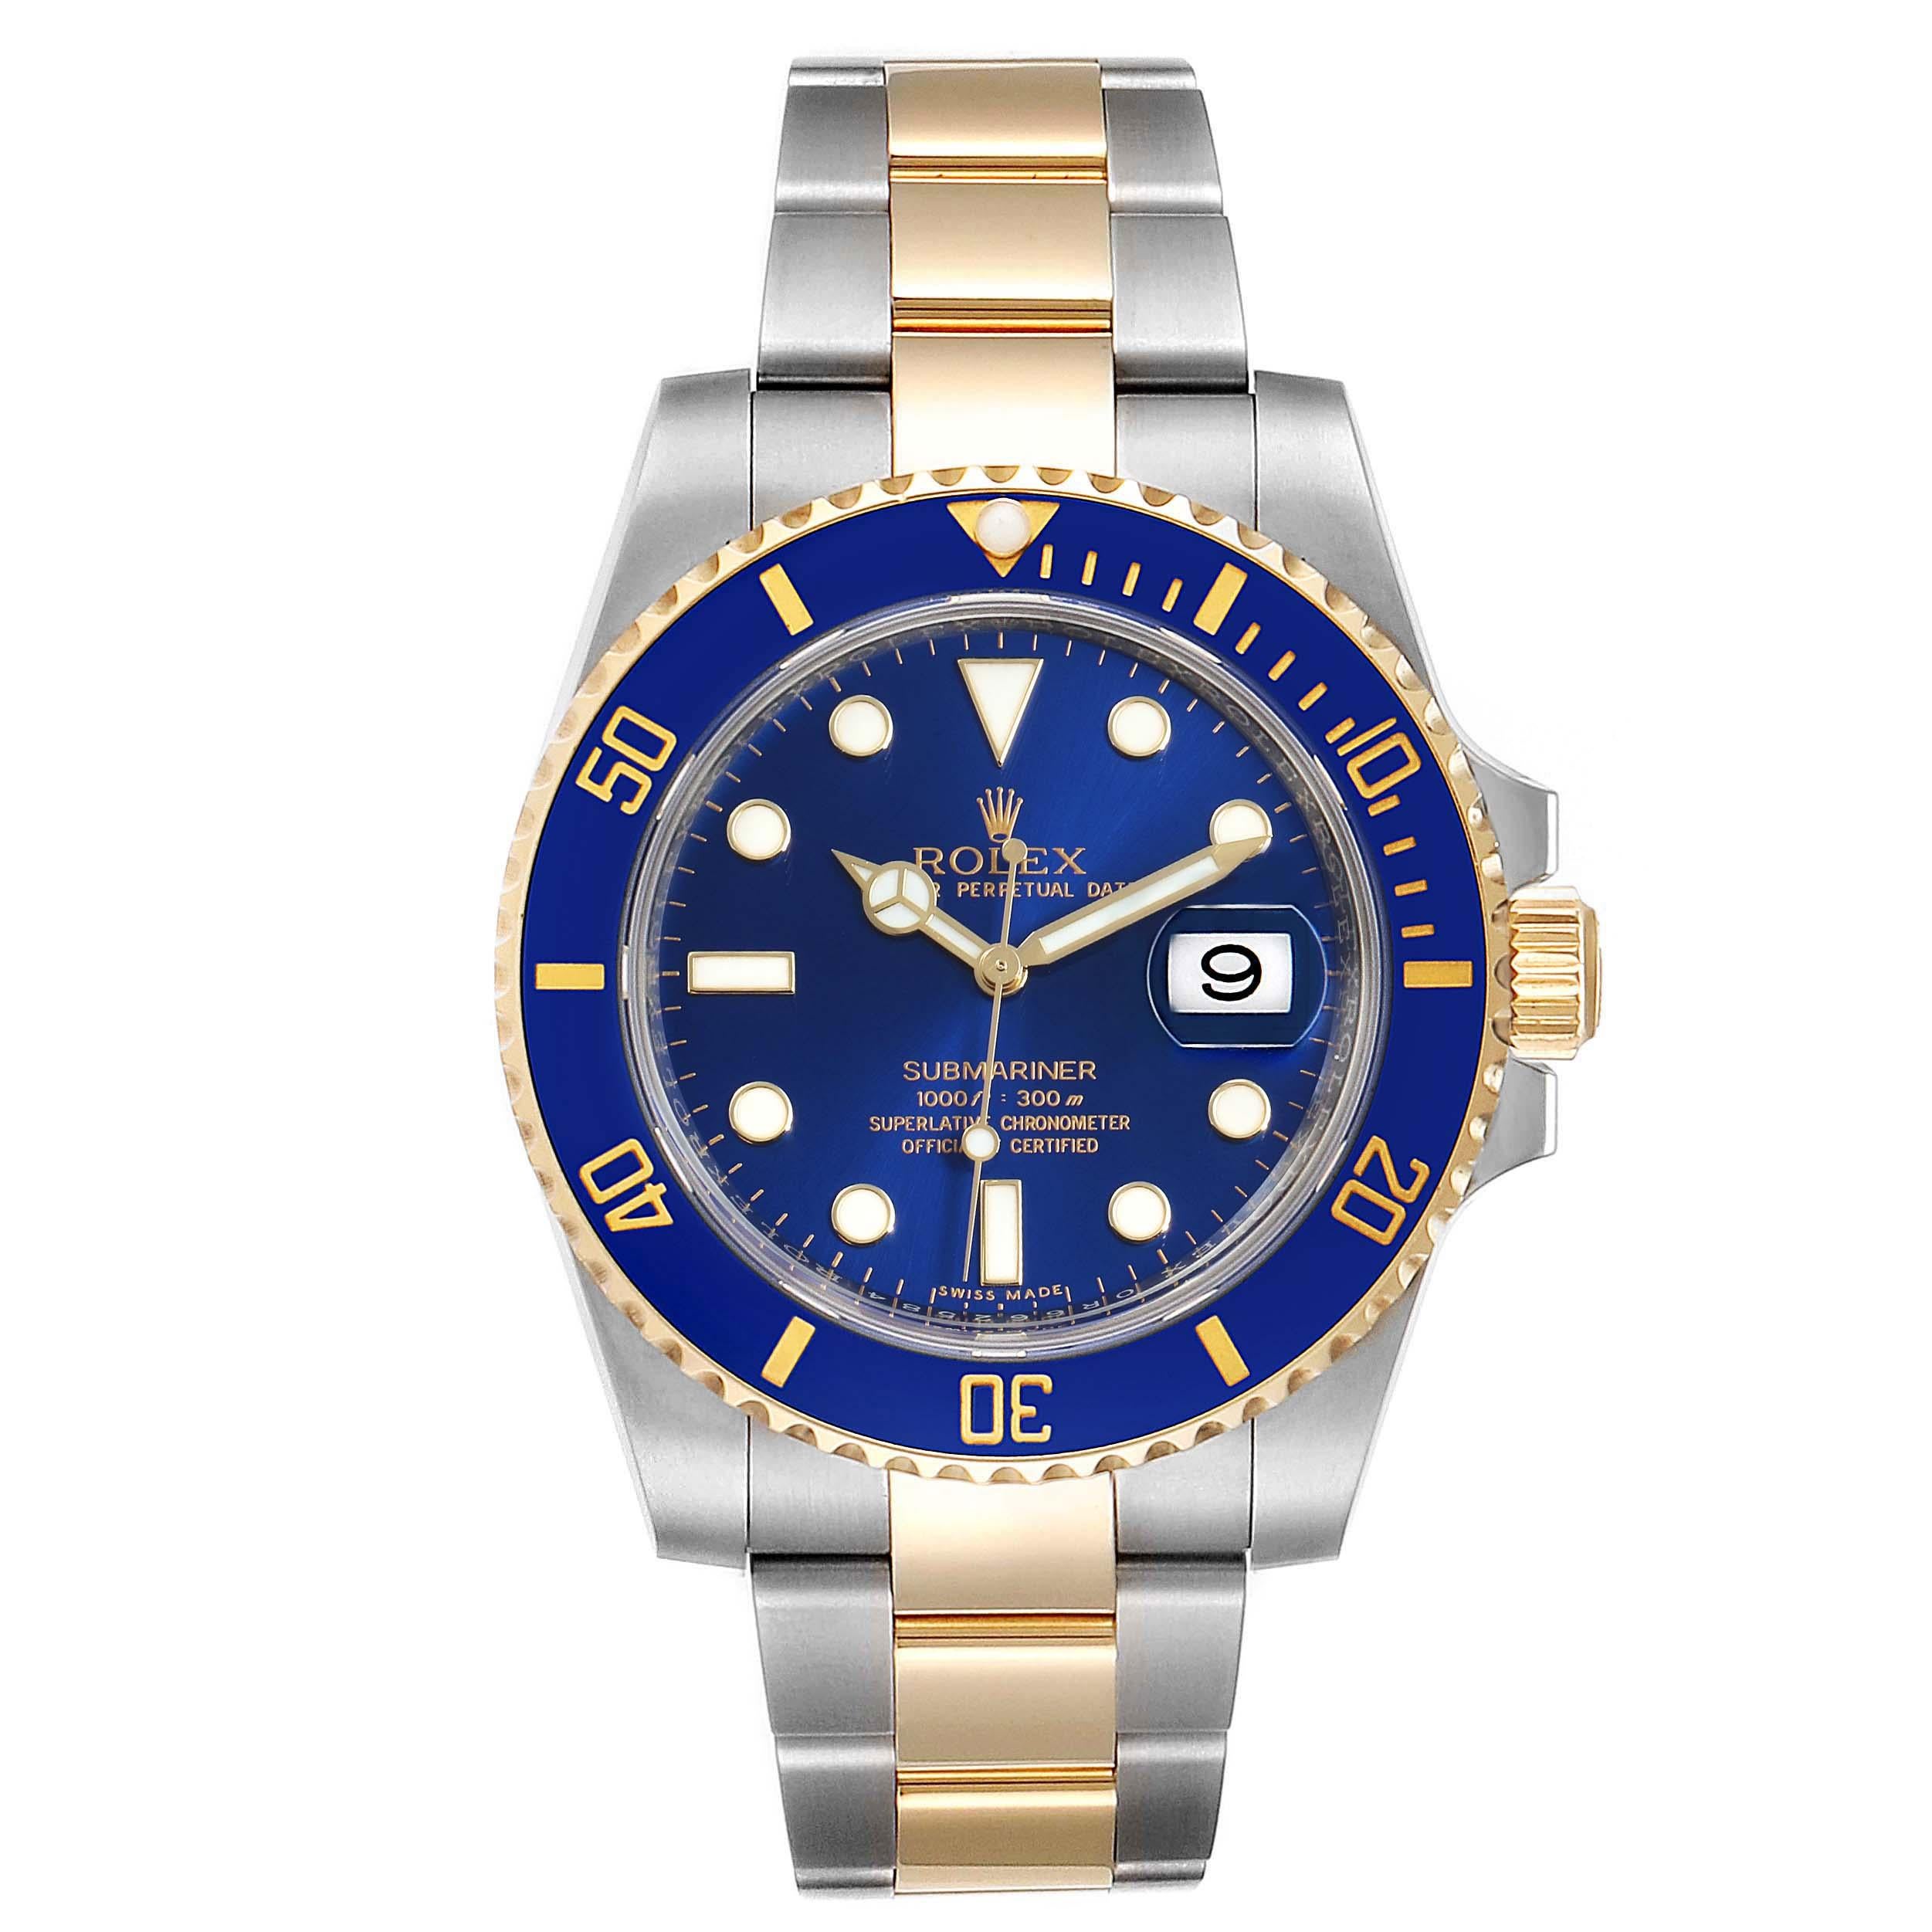 Rolex Submariner Blue Dial Steel Yellow Gold Mens Watch 116613 Box Card. Officially certified chronometer self-winding movement. Stainless steel and 18k yellow gold case 40.0 mm in diameter. Rolex logo on a crown. Ceramic blue Ion-plated special